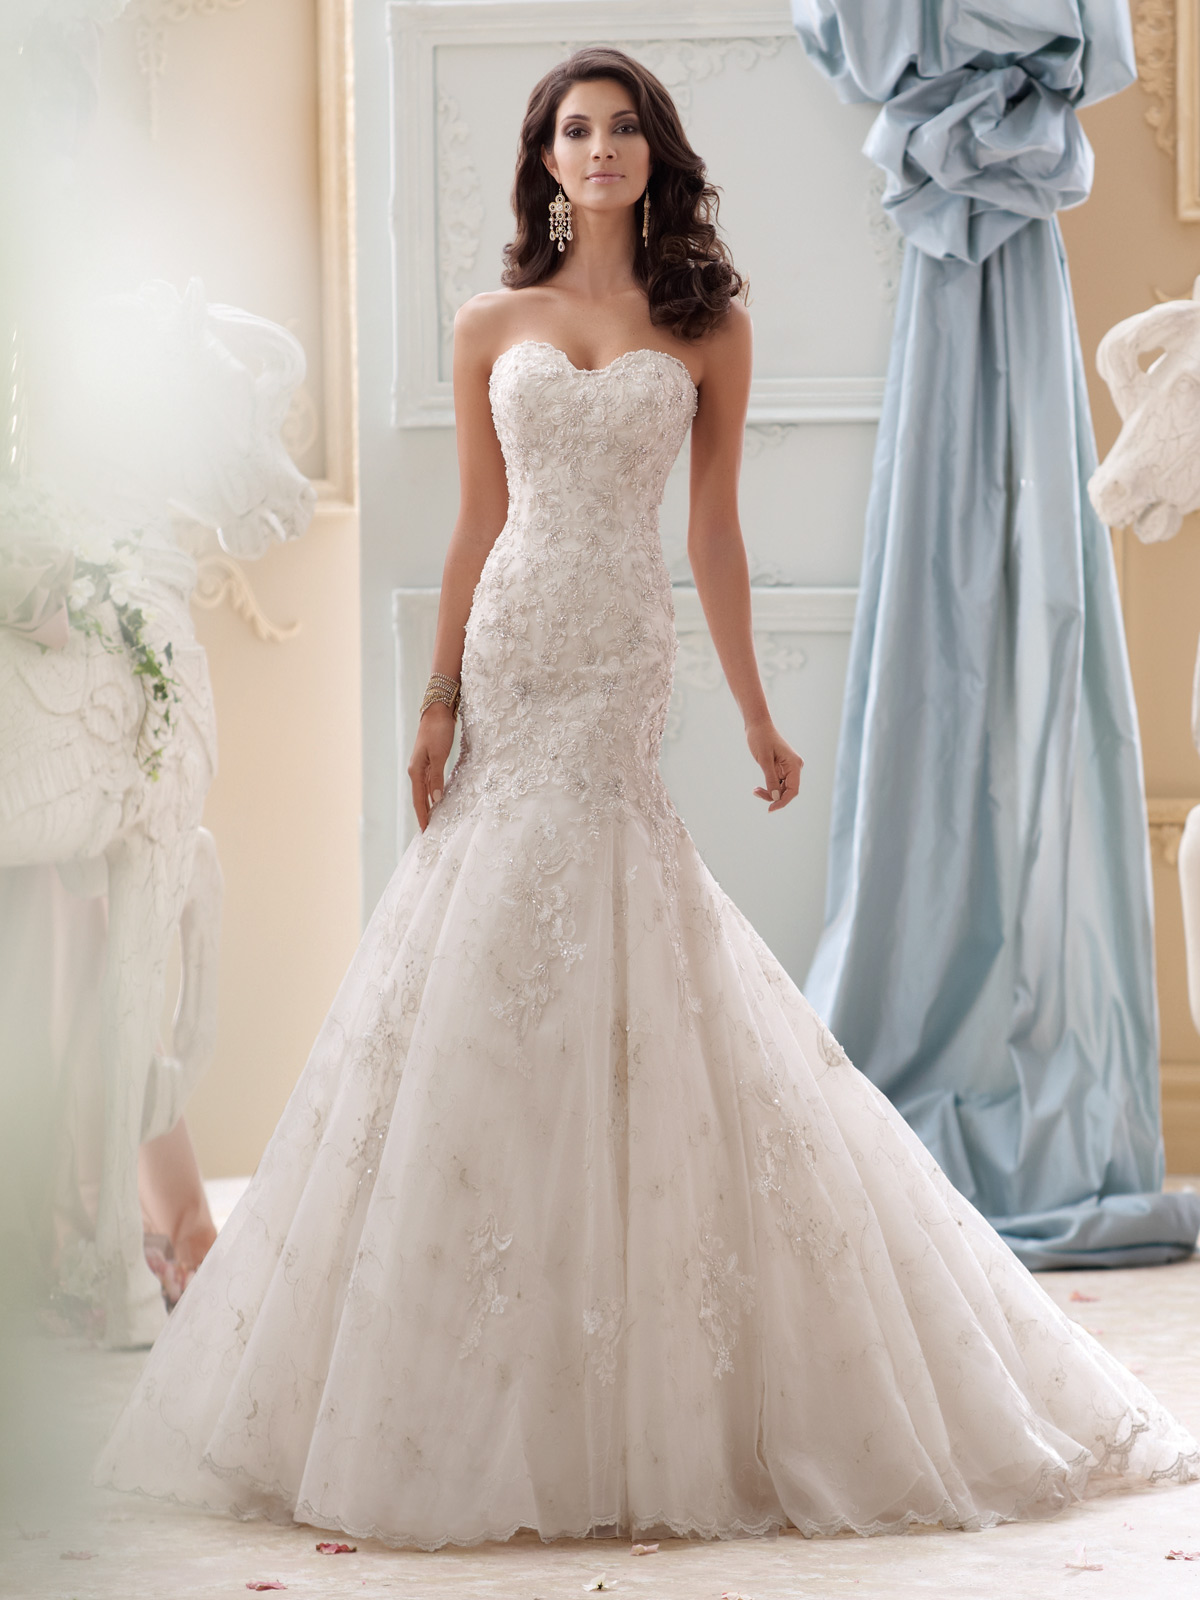 Lovely wedding gowns